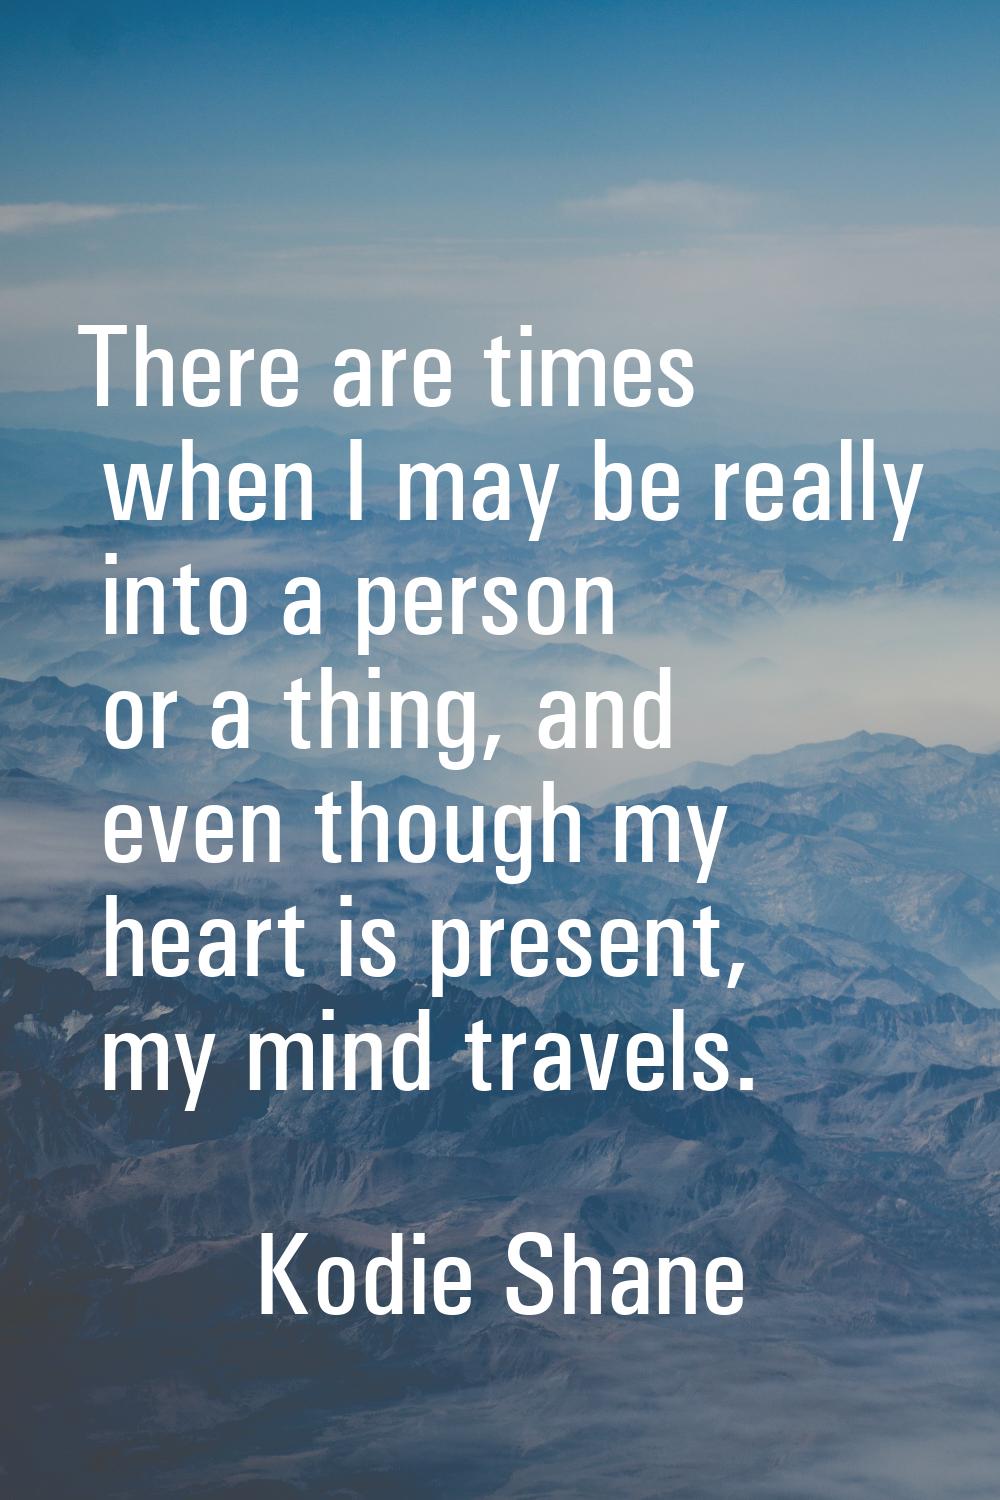 There are times when I may be really into a person or a thing, and even though my heart is present,